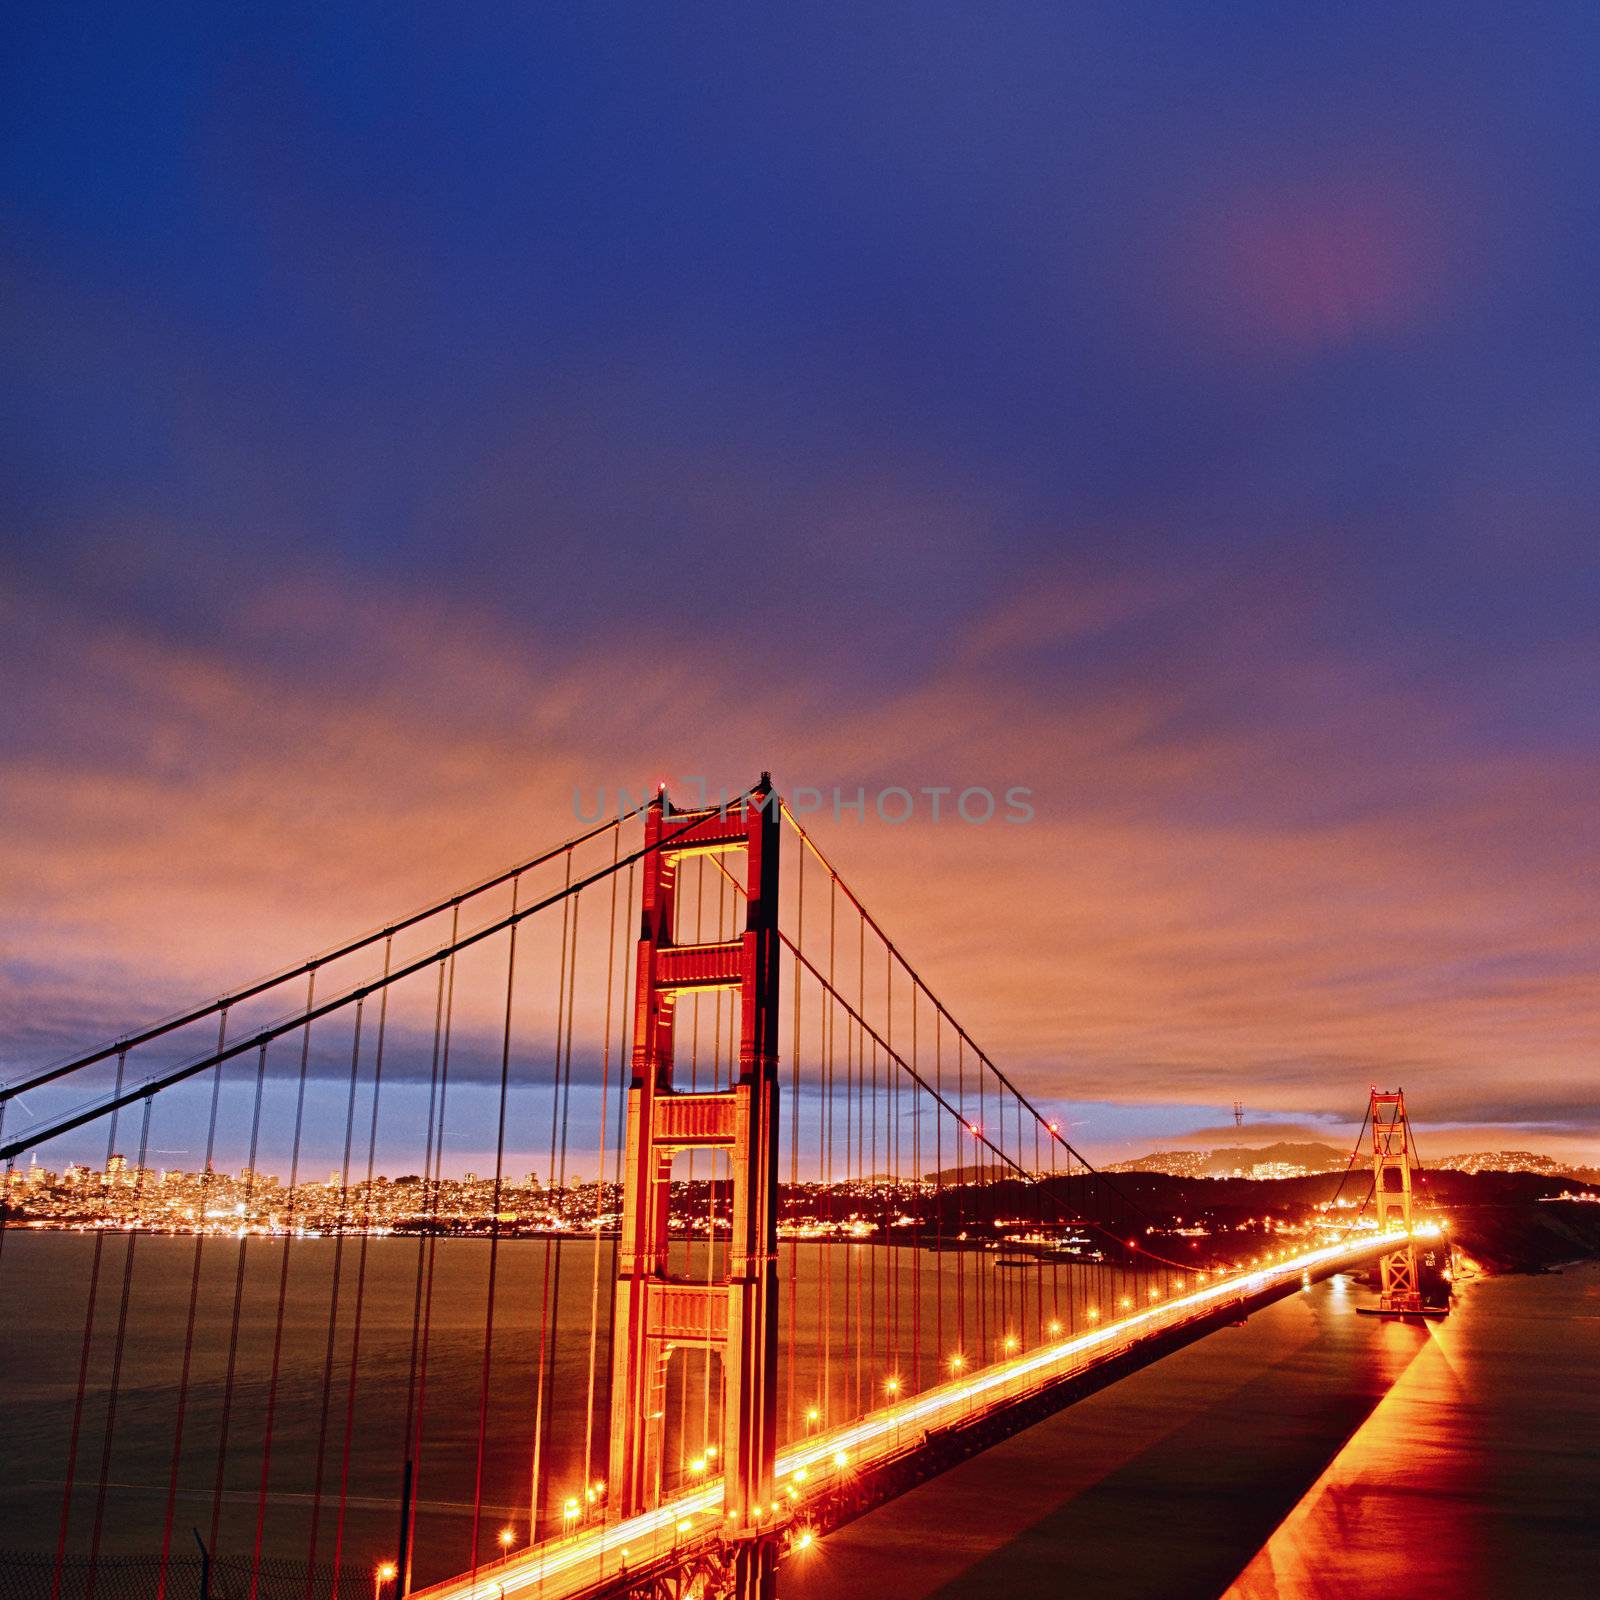 Golden Gate Bridge by night by vwalakte